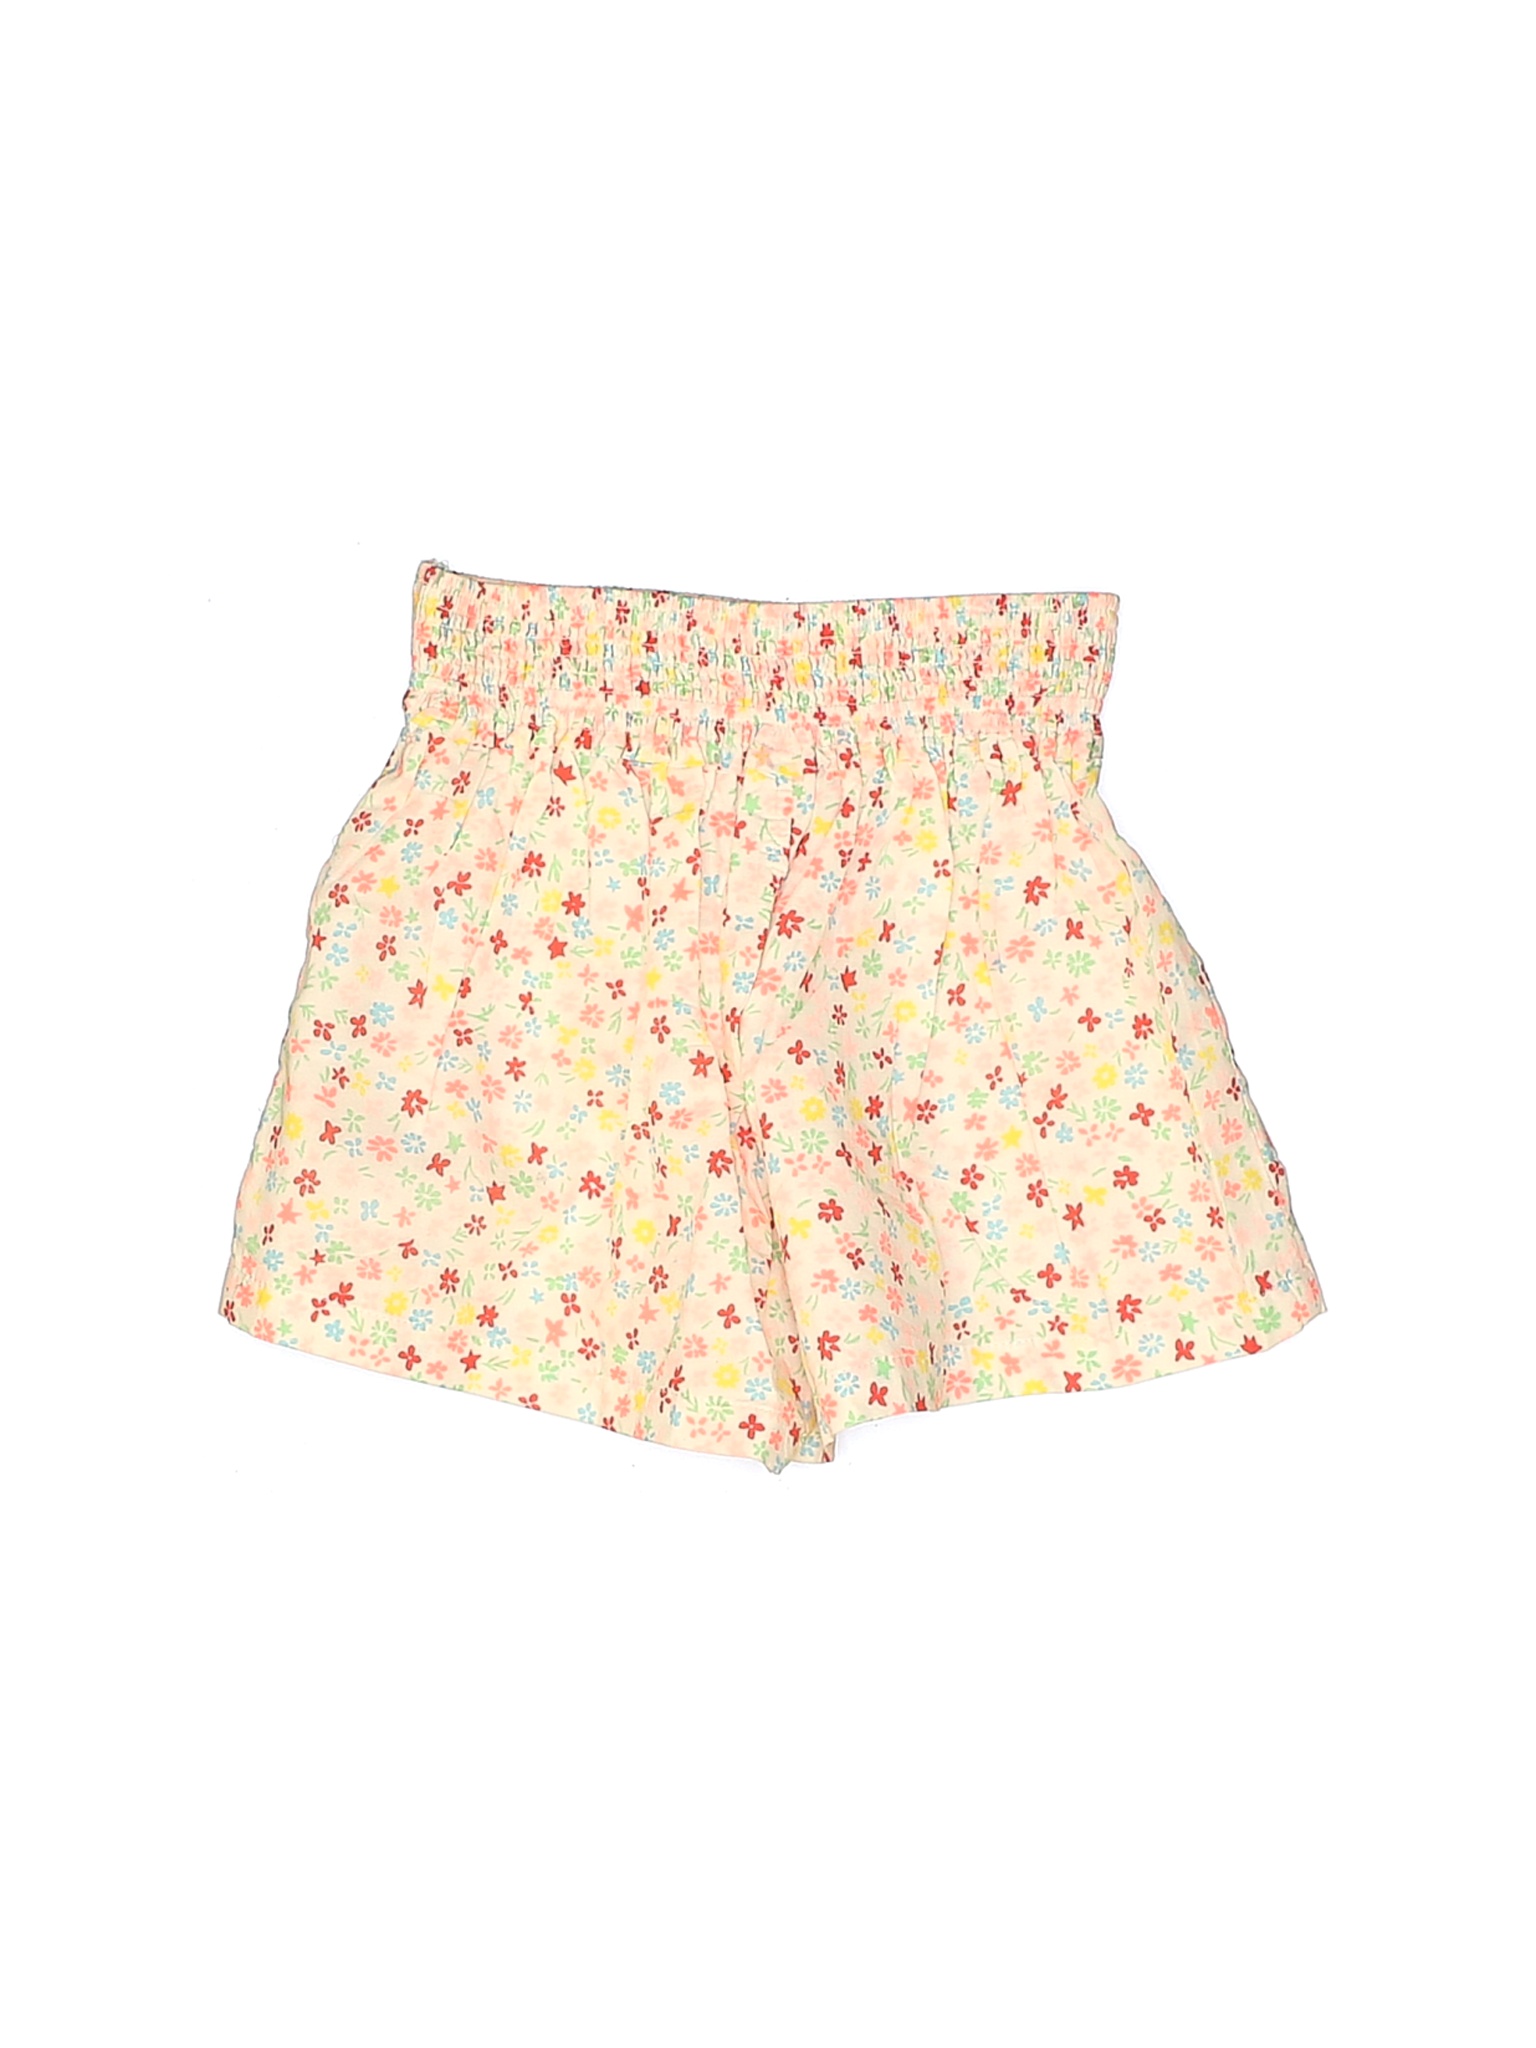 Crewcuts Girls' Casual Shorts On Sale Up To 90% Off Retail | thredUP